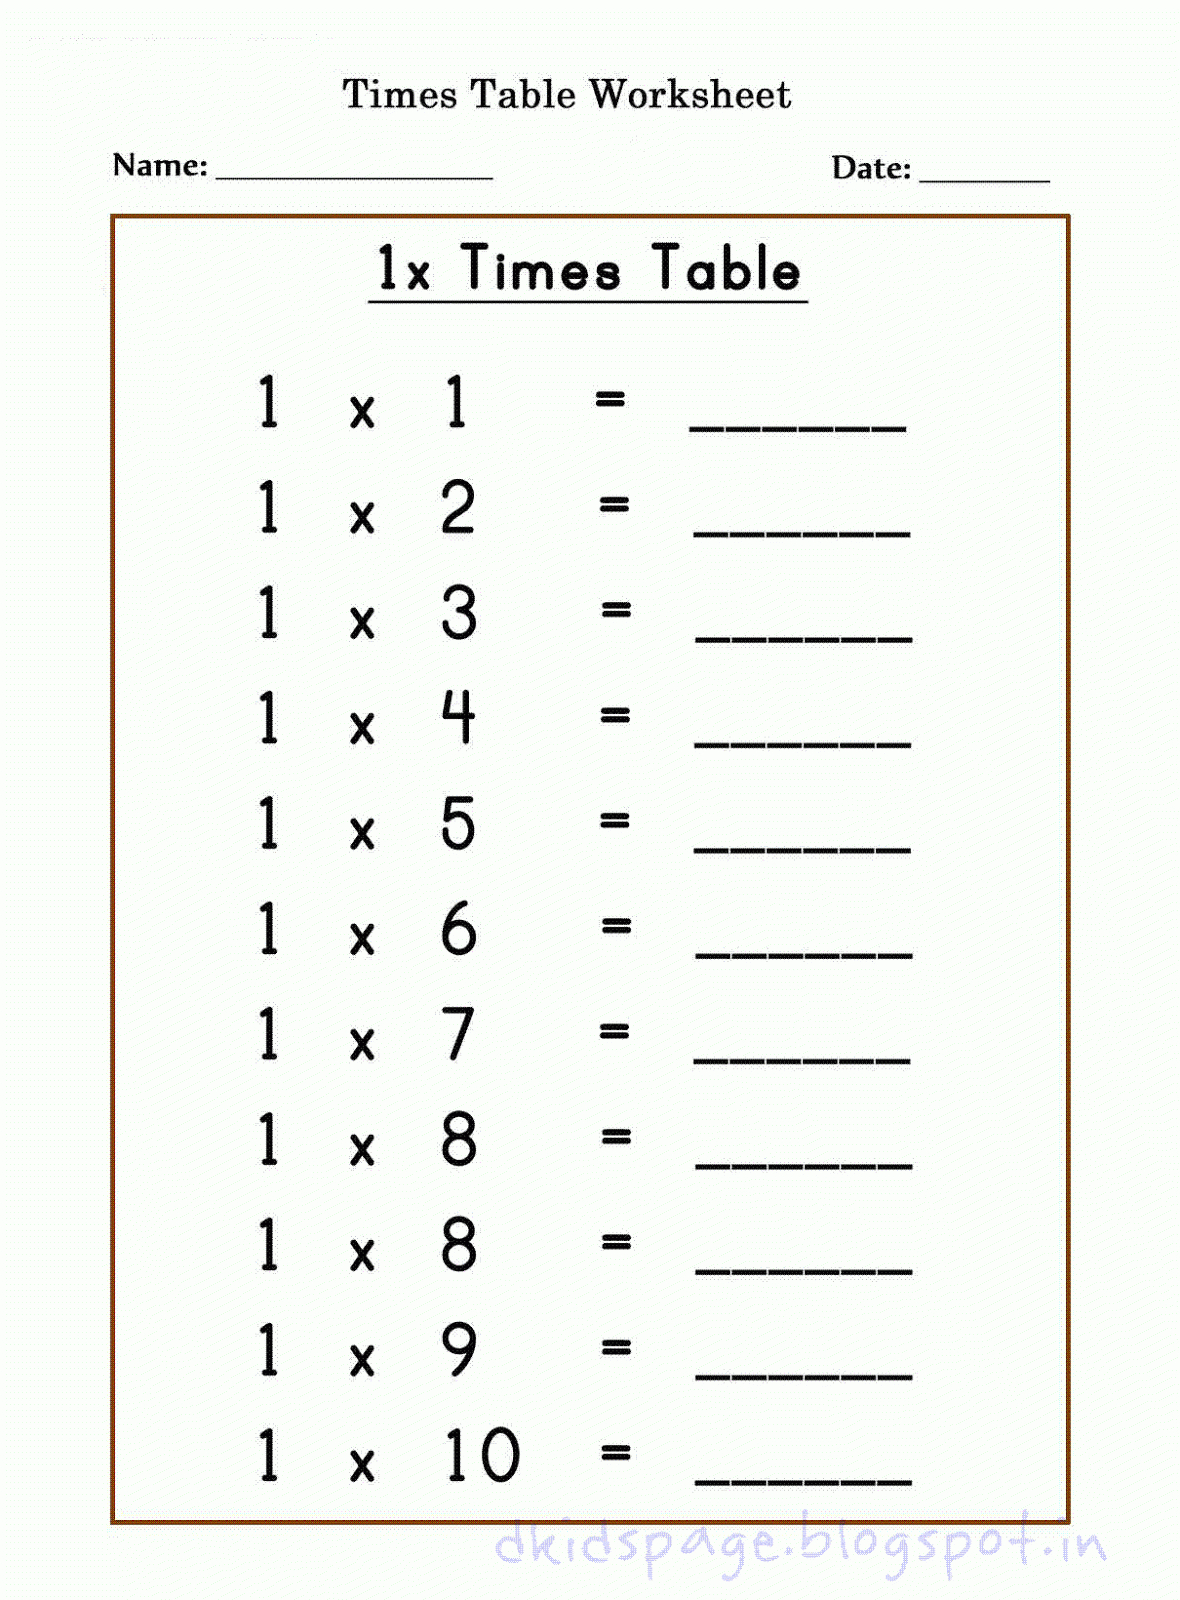 Kids Page: Printable 1 X Times Table Worksheets For Free with Multiplication Worksheets 6 And 7 Times Tables